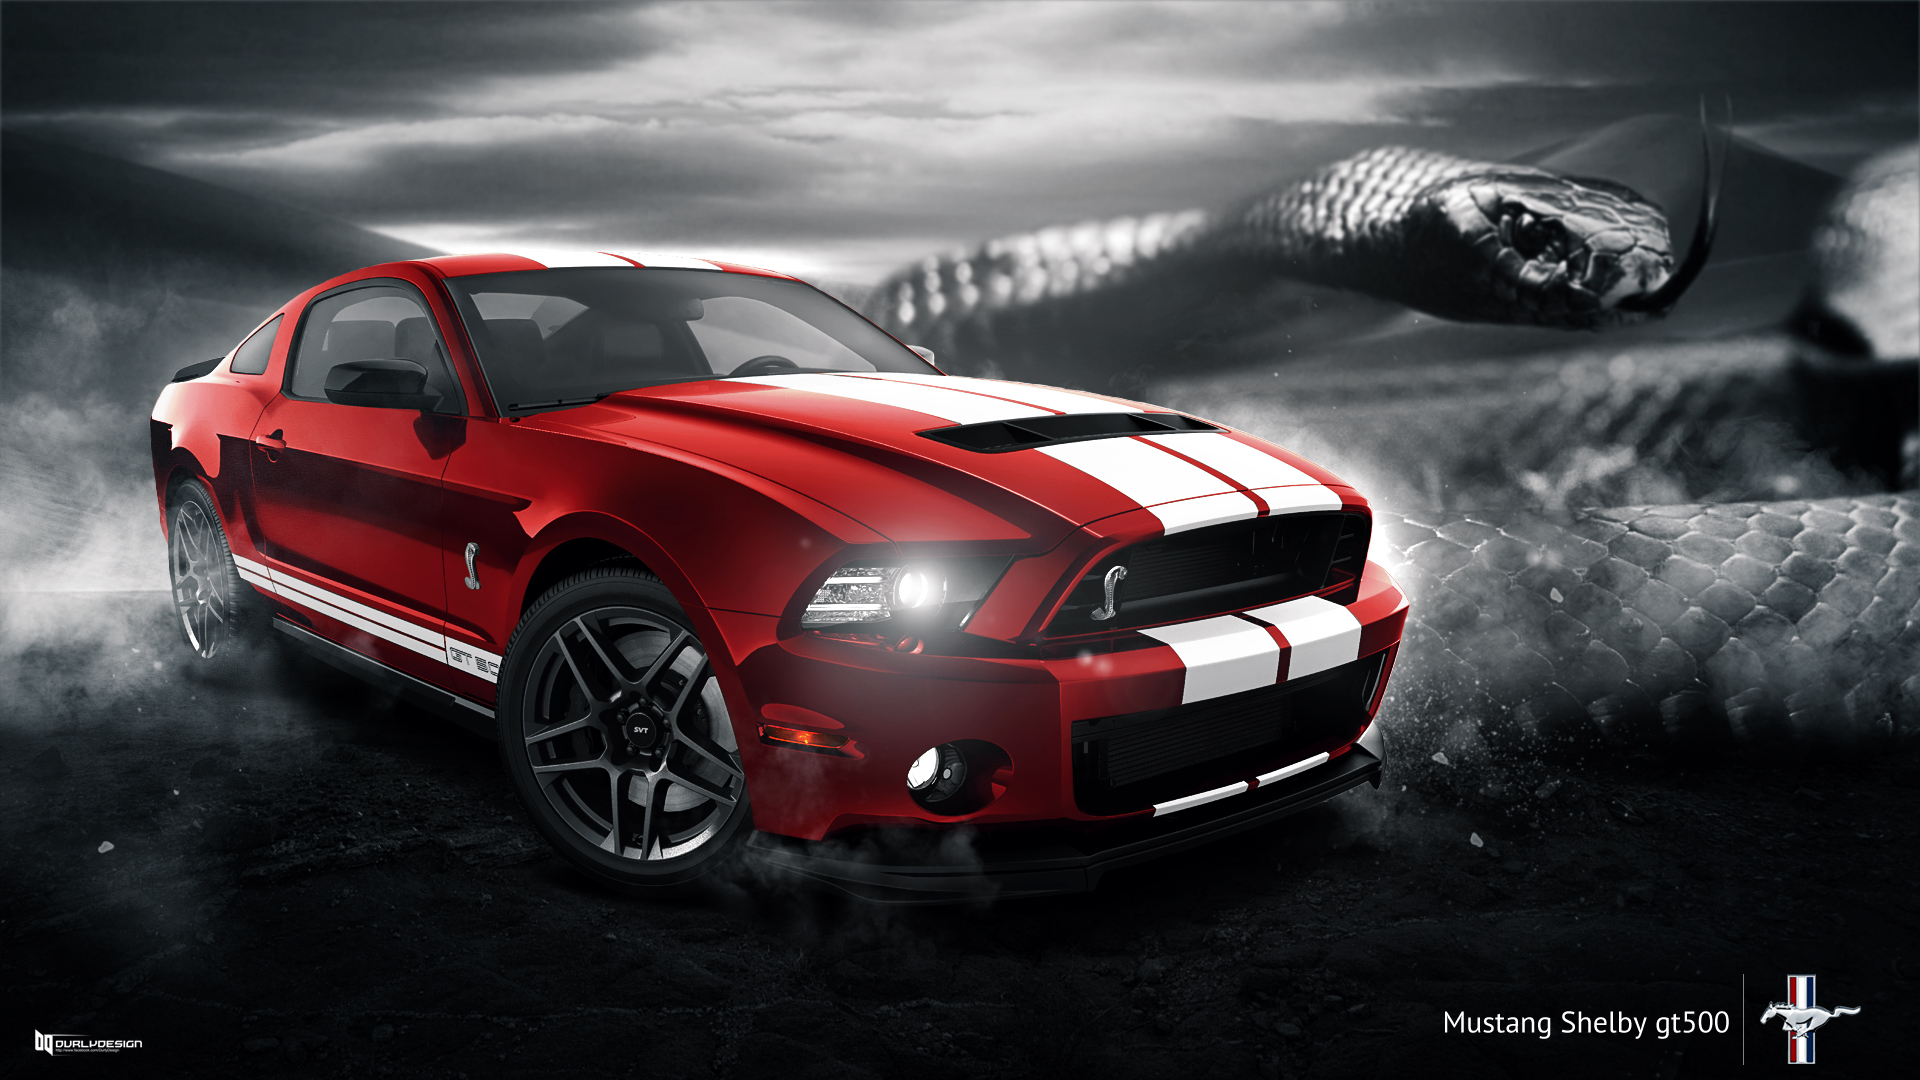 Ford Mustang Shelby Gt500 Wallpaper By Durly0505 On Deviantart